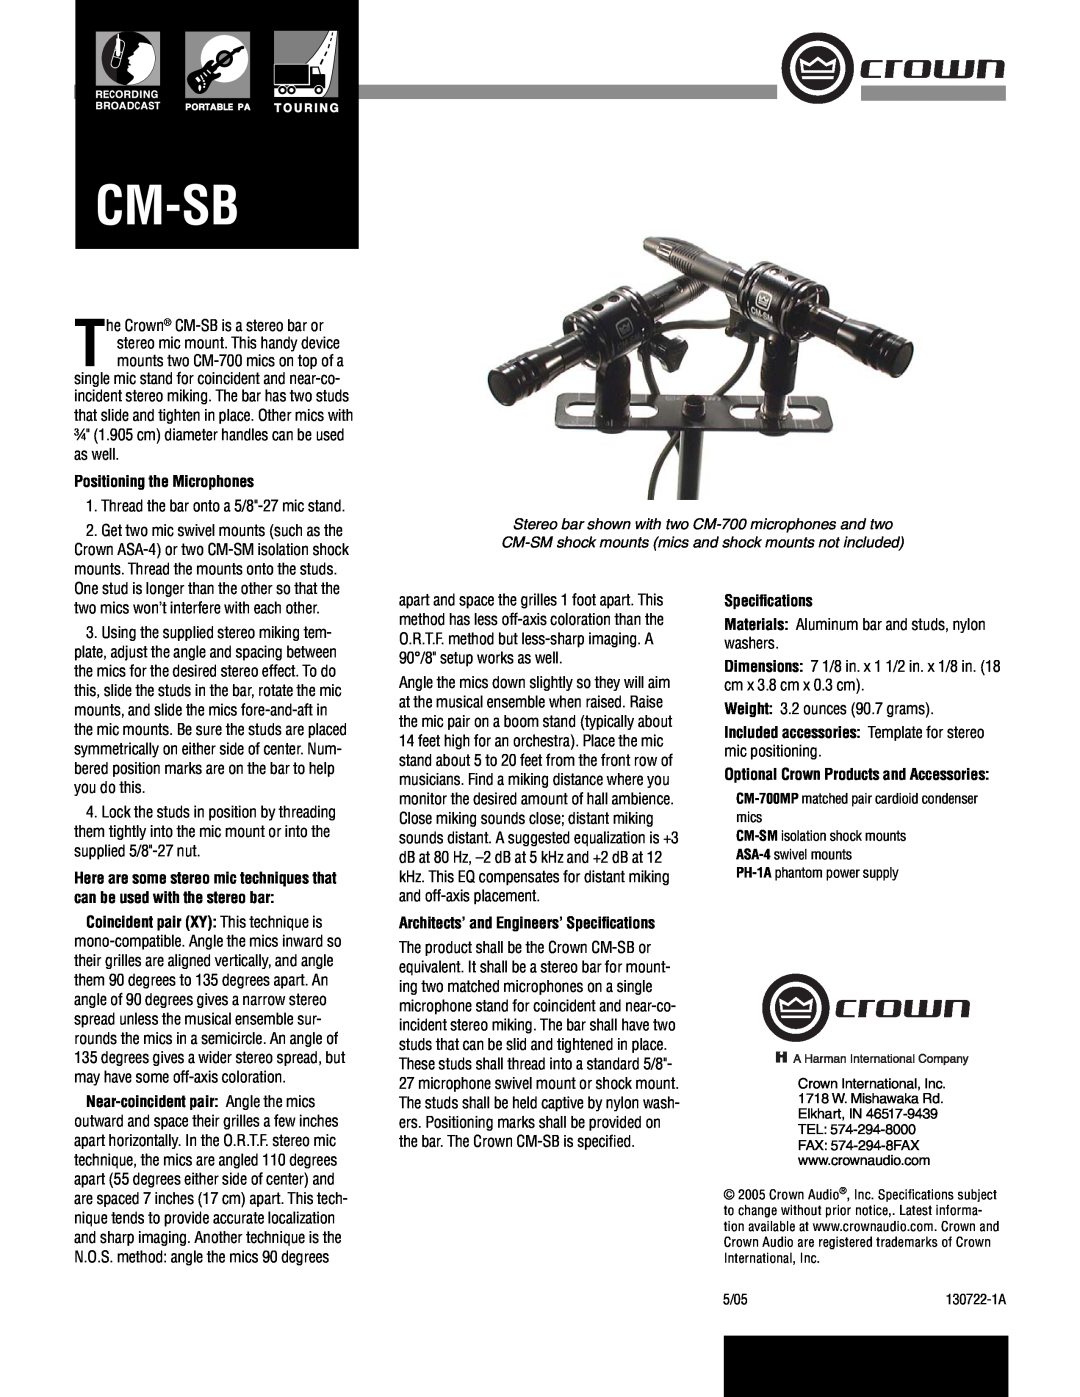 Crown Audio CM-SB specifications Cm-Sb, Positioning the Microphones, you do this, supplied 5/8-27 nut, Speciﬁcations 